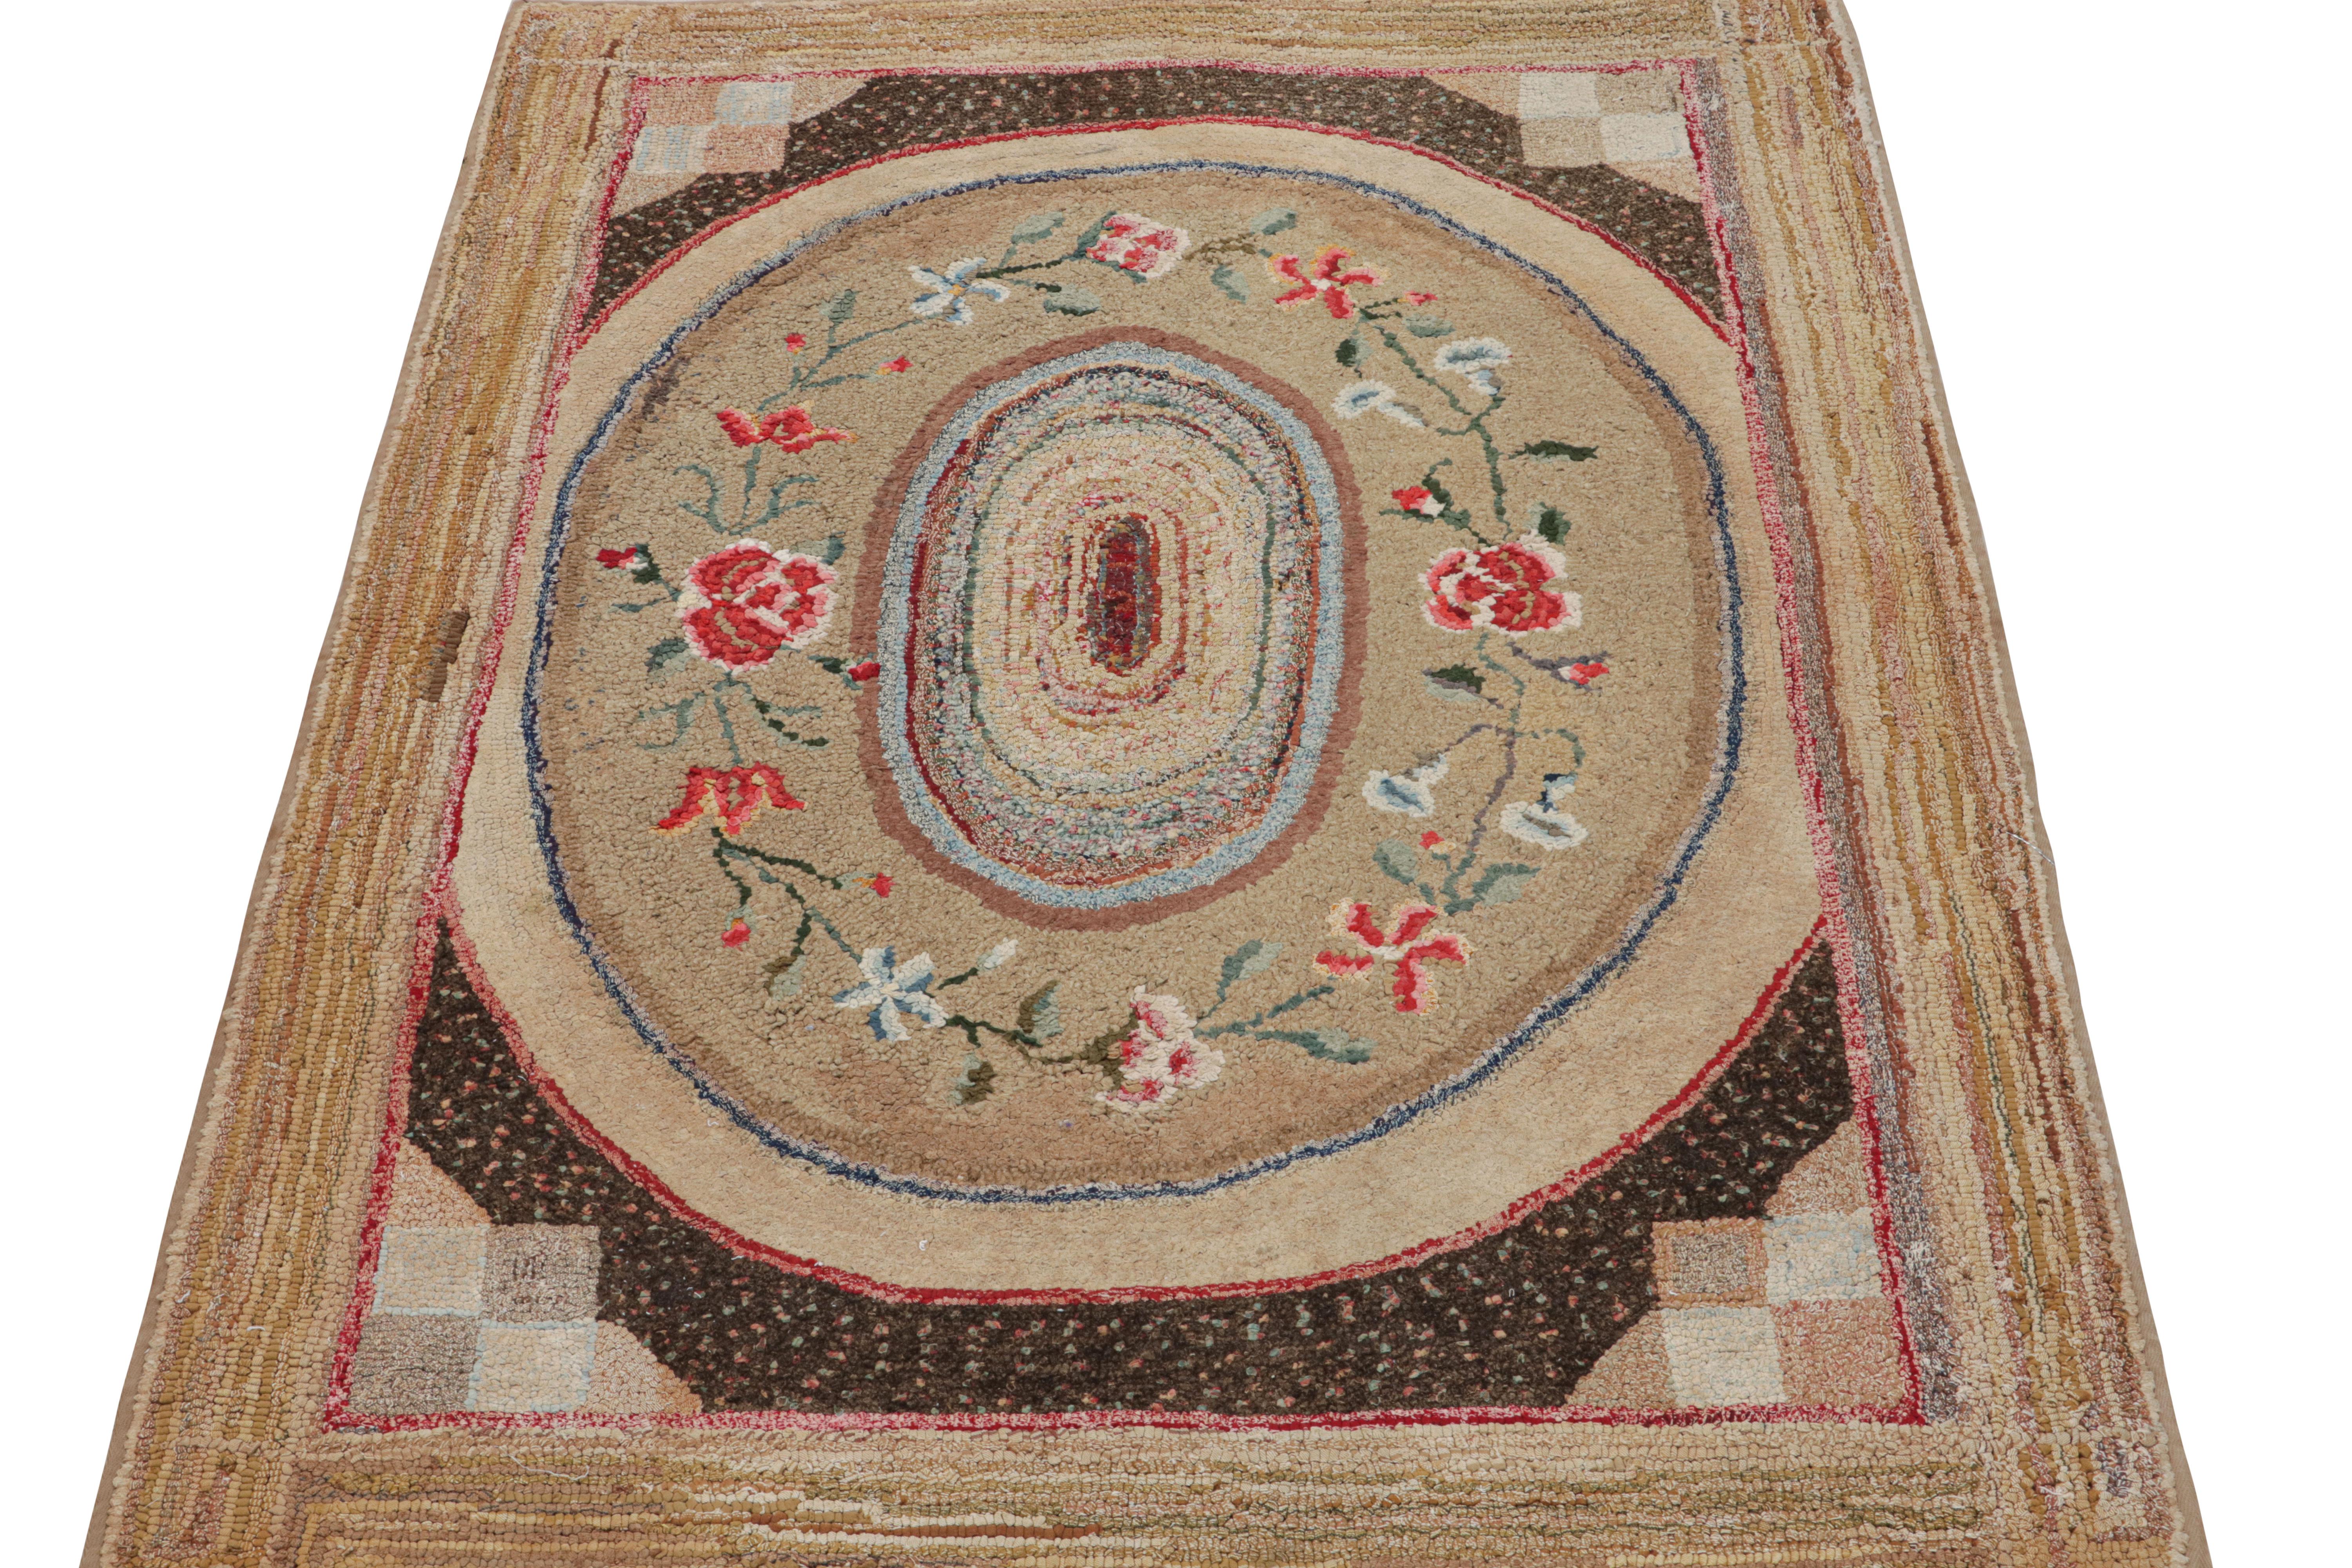 American Antique Hooked Rug in Brown, with Floral Patterns, from Rug & Kilim